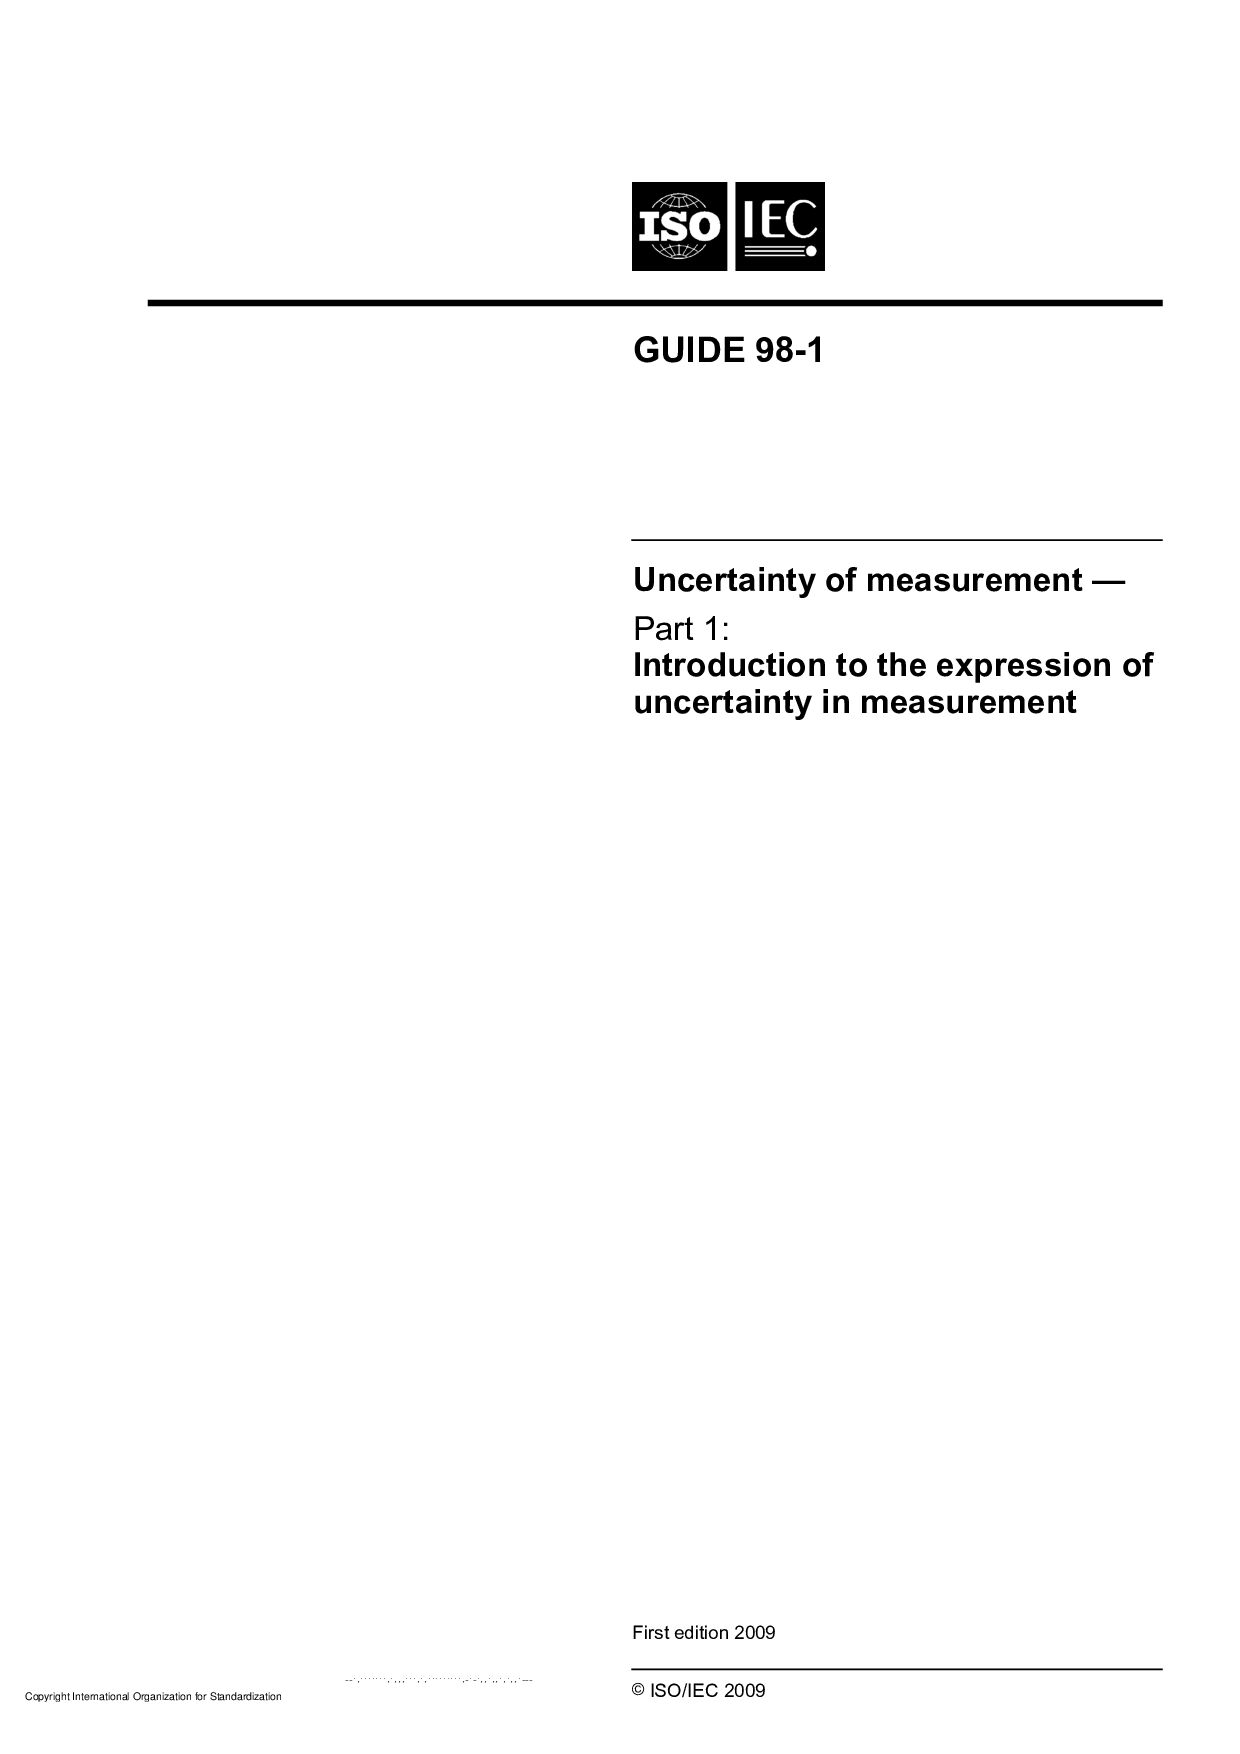 ISO/IEC GUIDE 98-1:2009封面图